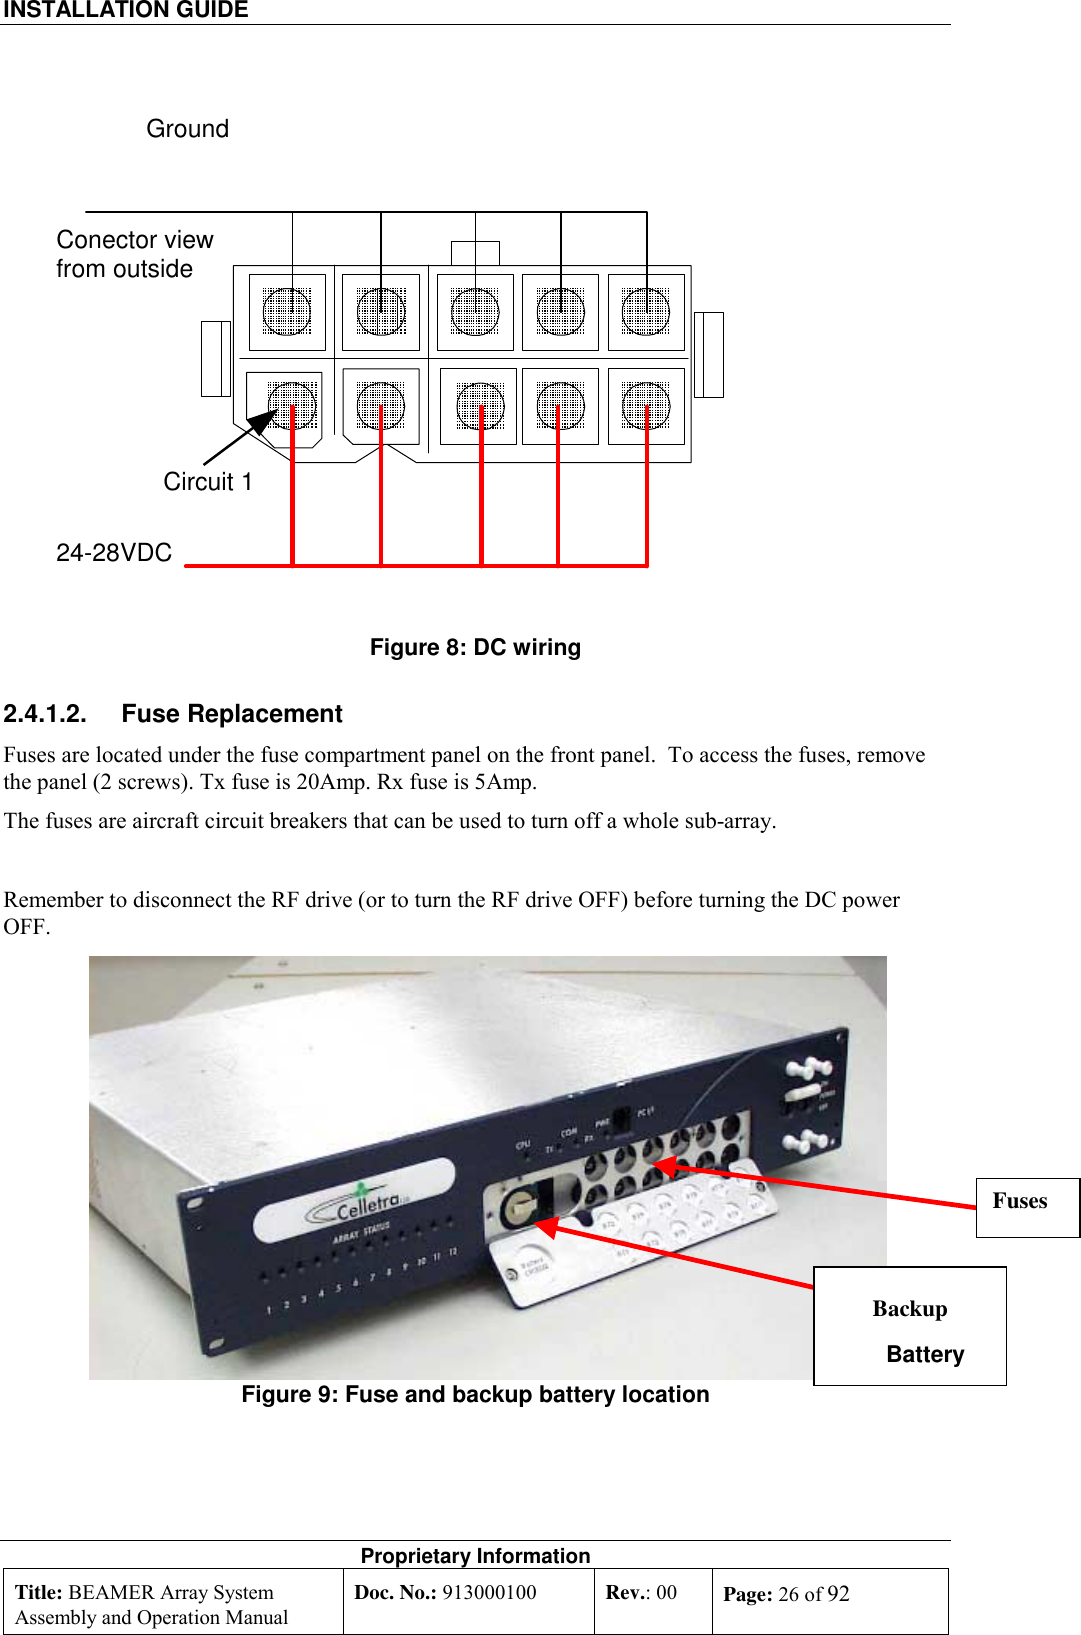 INSTALLATION GUIDE    Proprietary Information Title: BEAMER Array System Assembly and Operation Manual Doc. No.: 913000100  Rev.: 00  Page: 26 of 92   Figure 8: DC wiring 2.4.1.2. Fuse Replacement Fuses are located under the fuse compartment panel on the front panel.  To access the fuses, remove the panel (2 screws). Tx fuse is 20Amp. Rx fuse is 5Amp. The fuses are aircraft circuit breakers that can be used to turn off a whole sub-array.  Remember to disconnect the RF drive (or to turn the RF drive OFF) before turning the DC power OFF. Figure 9: Fuse and backup battery location Conector viewfrom outside24-28VDCGroundCircuit 1Backup Battery Fuses 